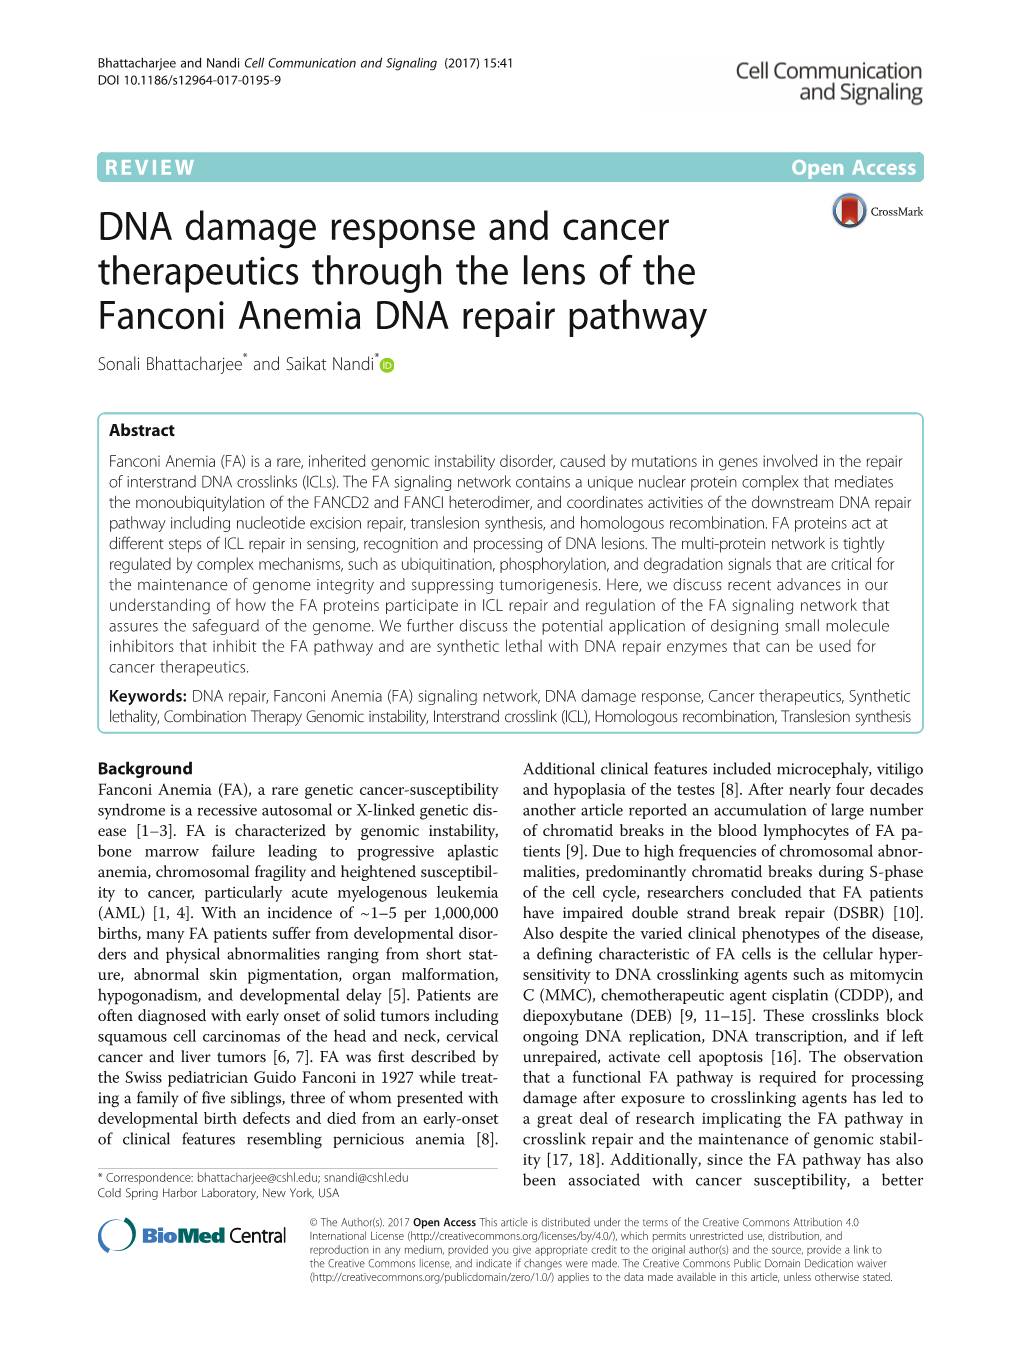 DNA Damage Response and Cancer Therapeutics Through the Lens of the Fanconi Anemia DNA Repair Pathway Sonali Bhattacharjee* and Saikat Nandi*